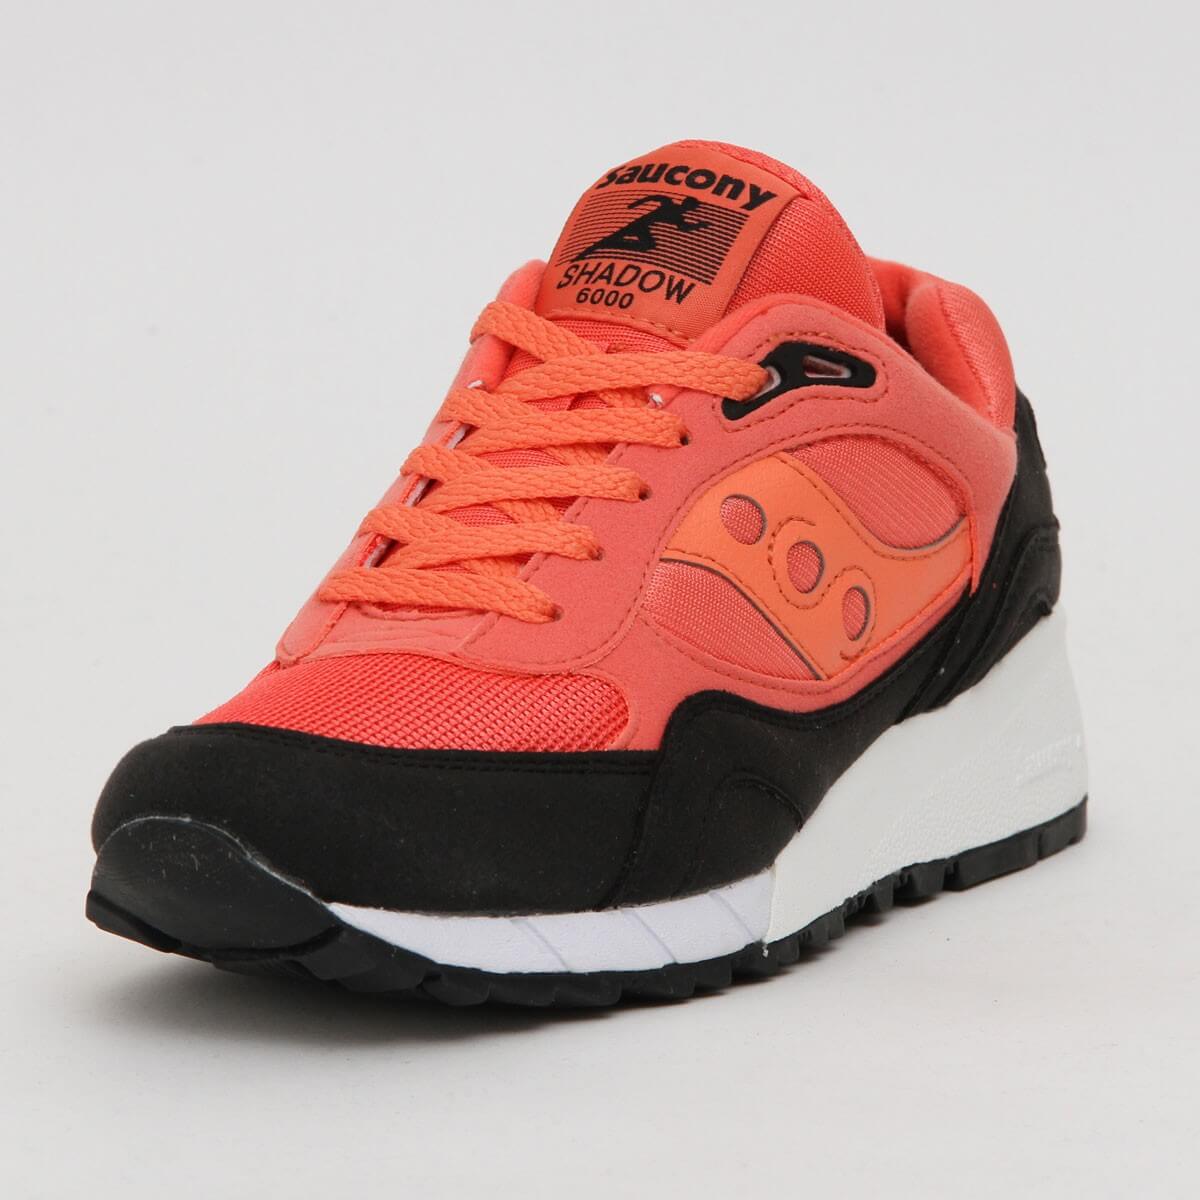 saucony shadow 6000 red black